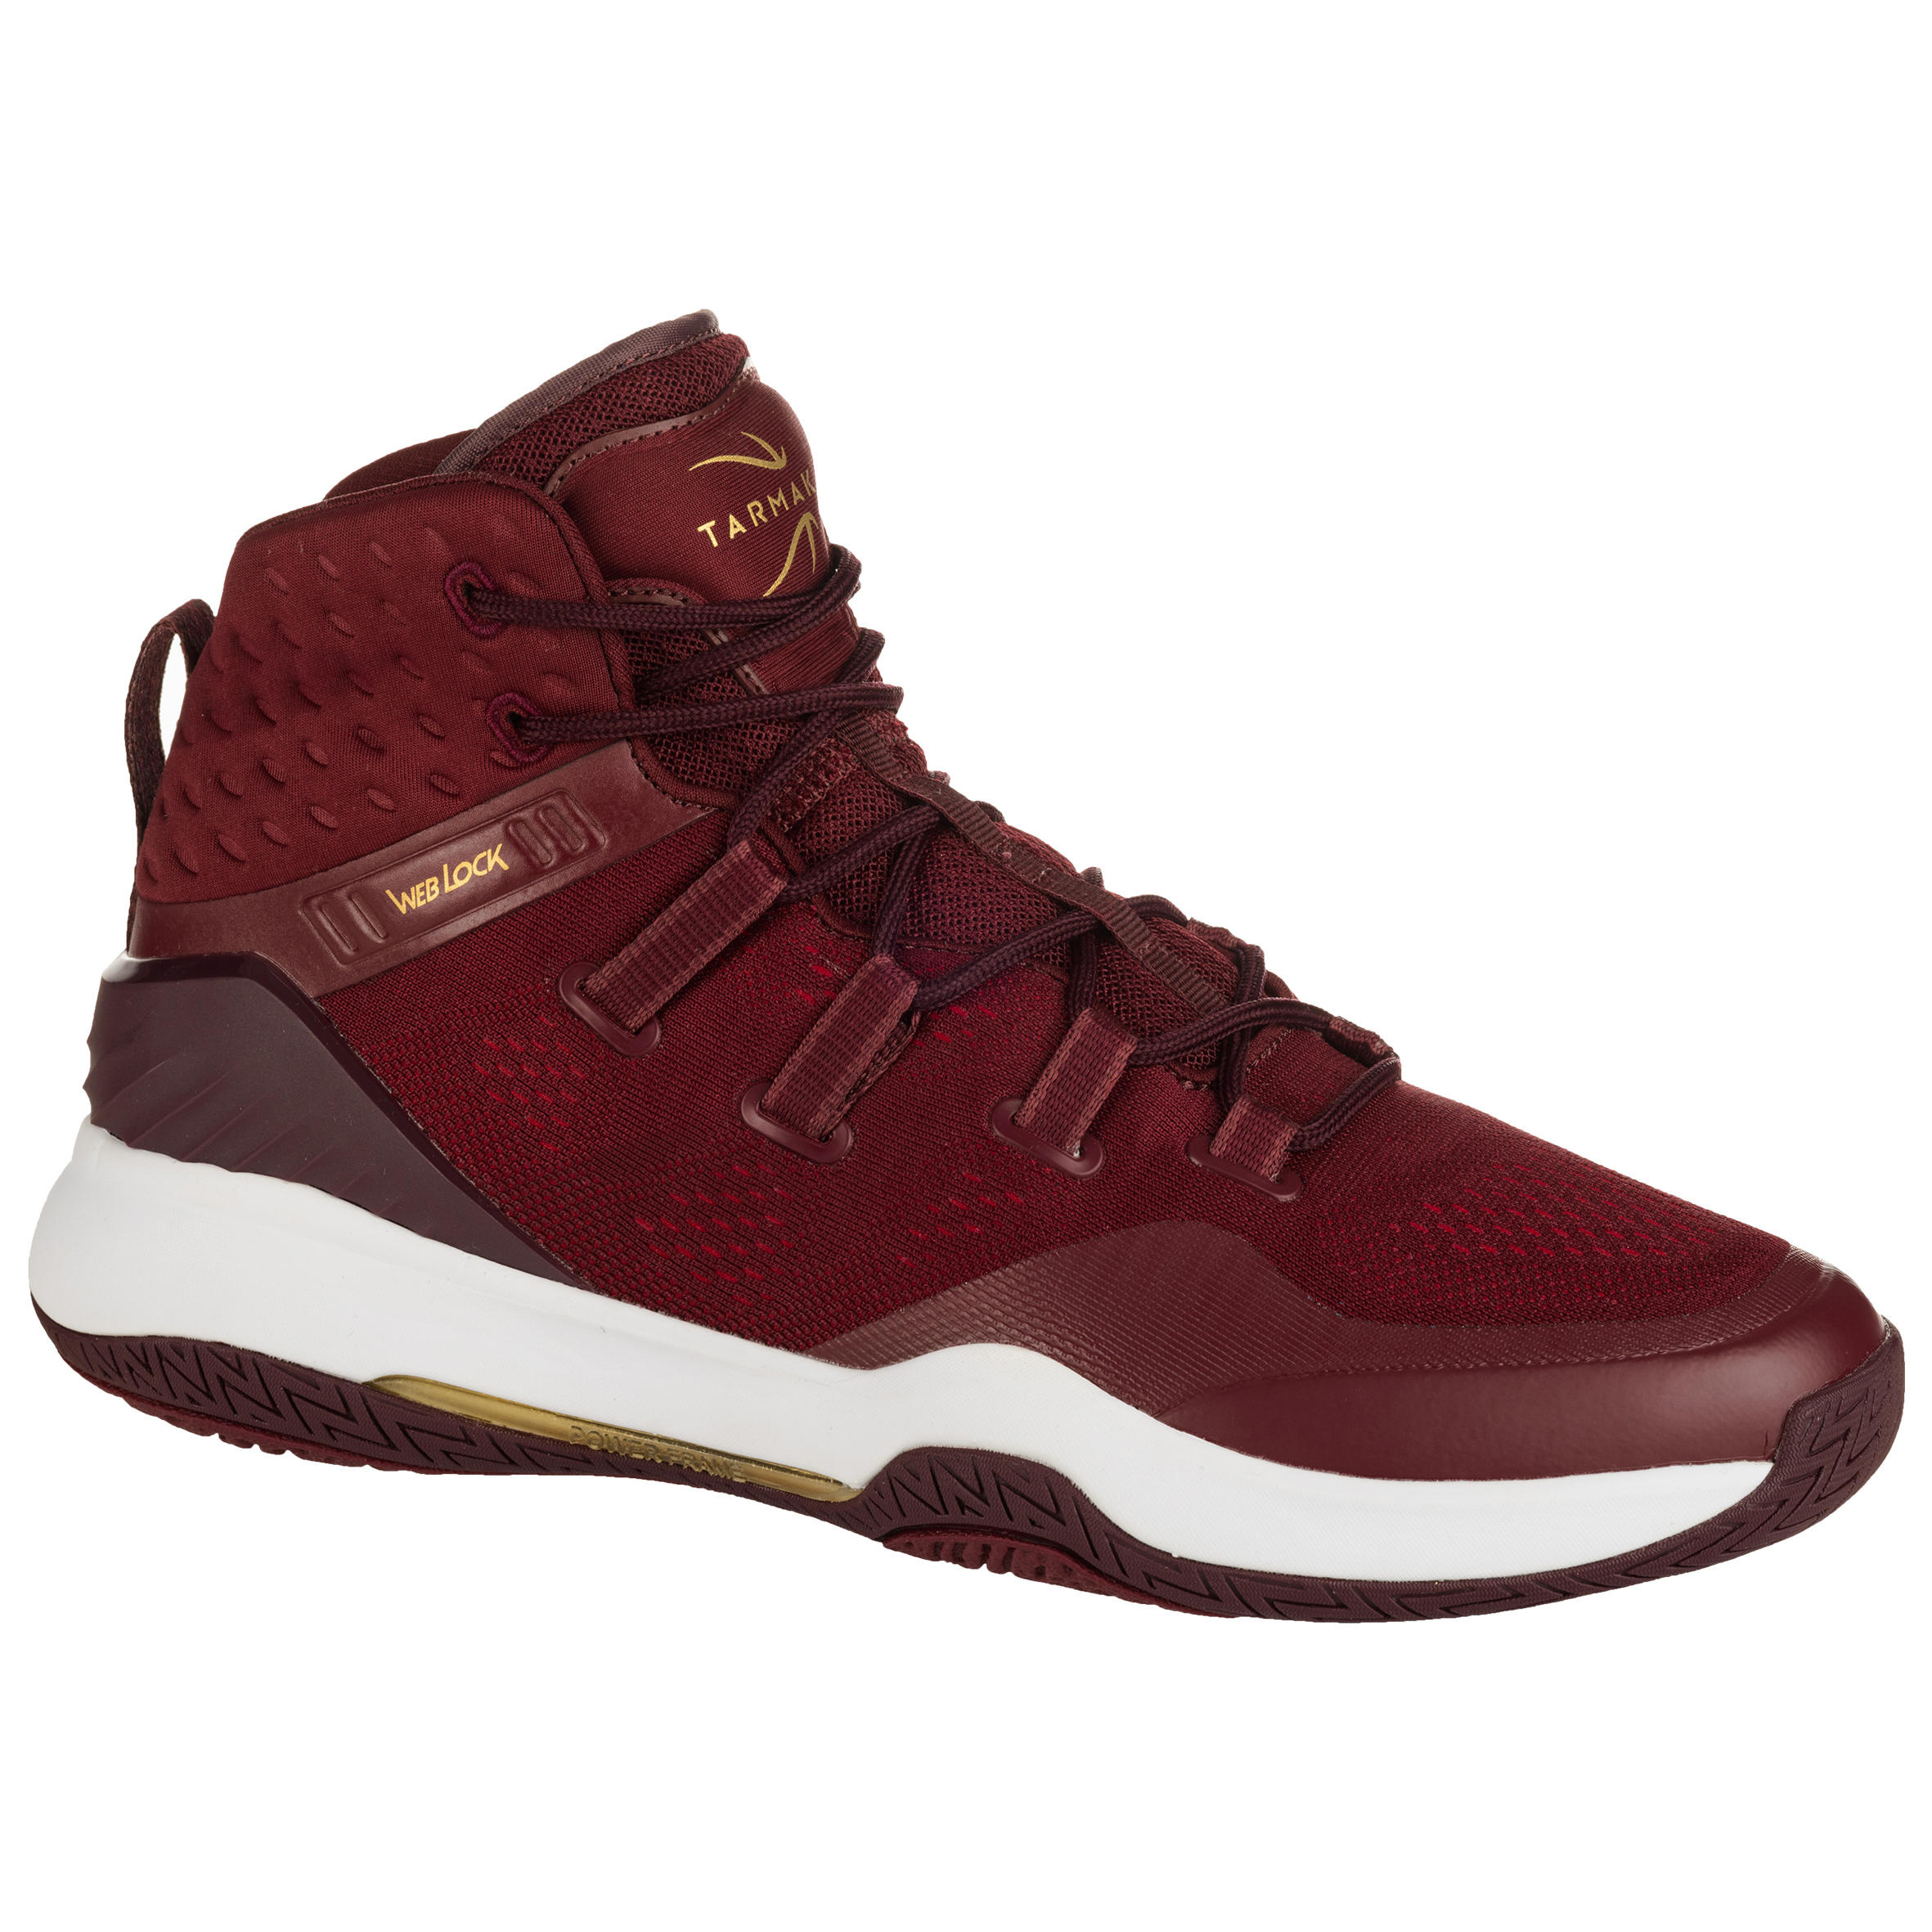 burgundy and gold basketball shoes